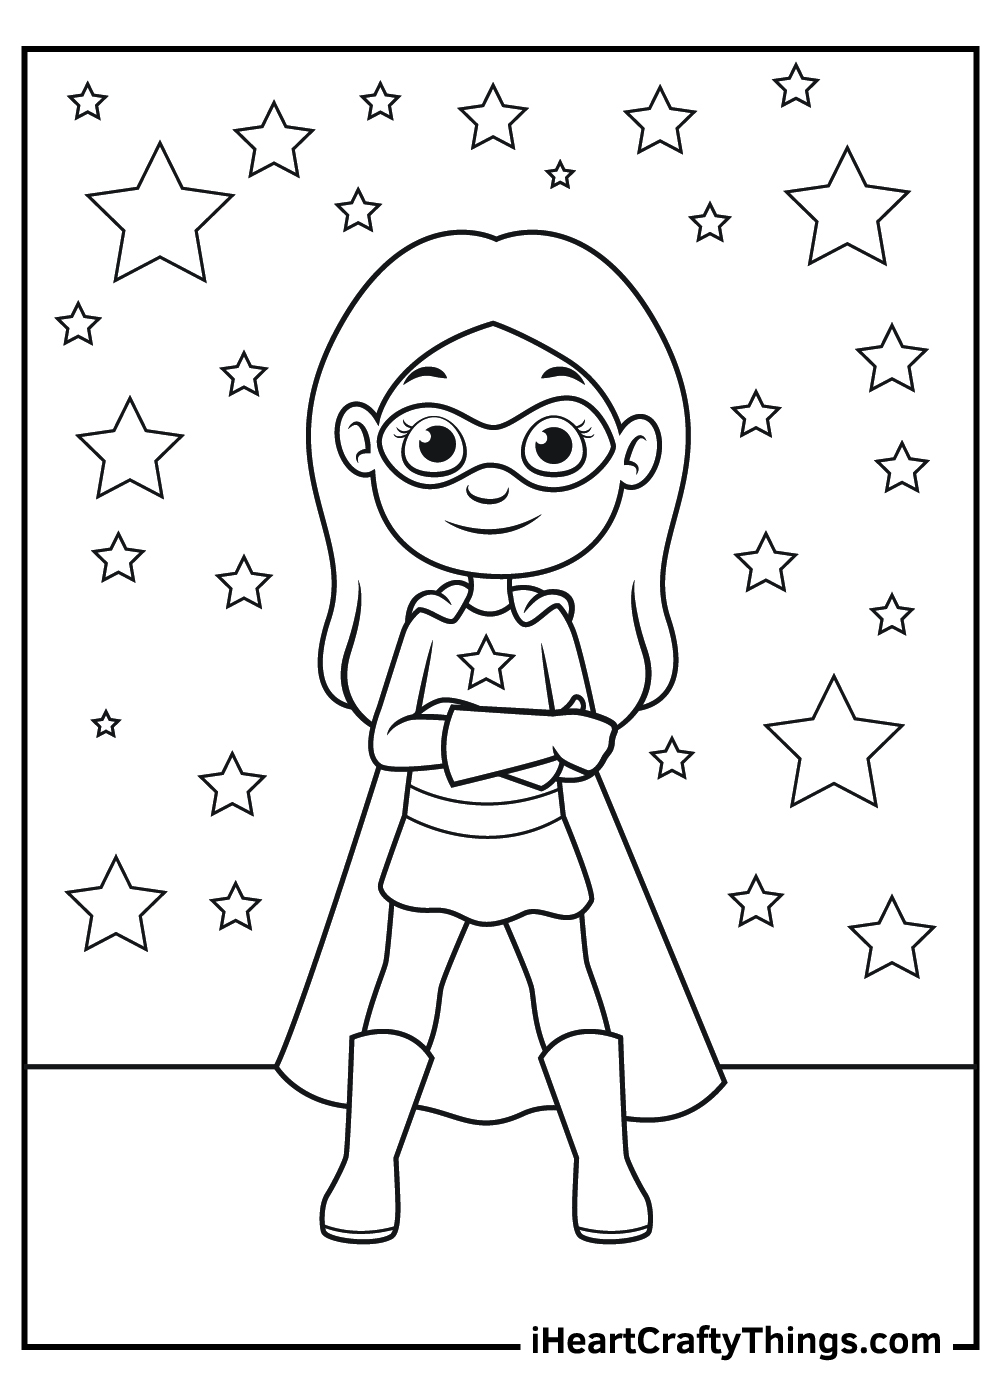 Superhero coloring pages free printables